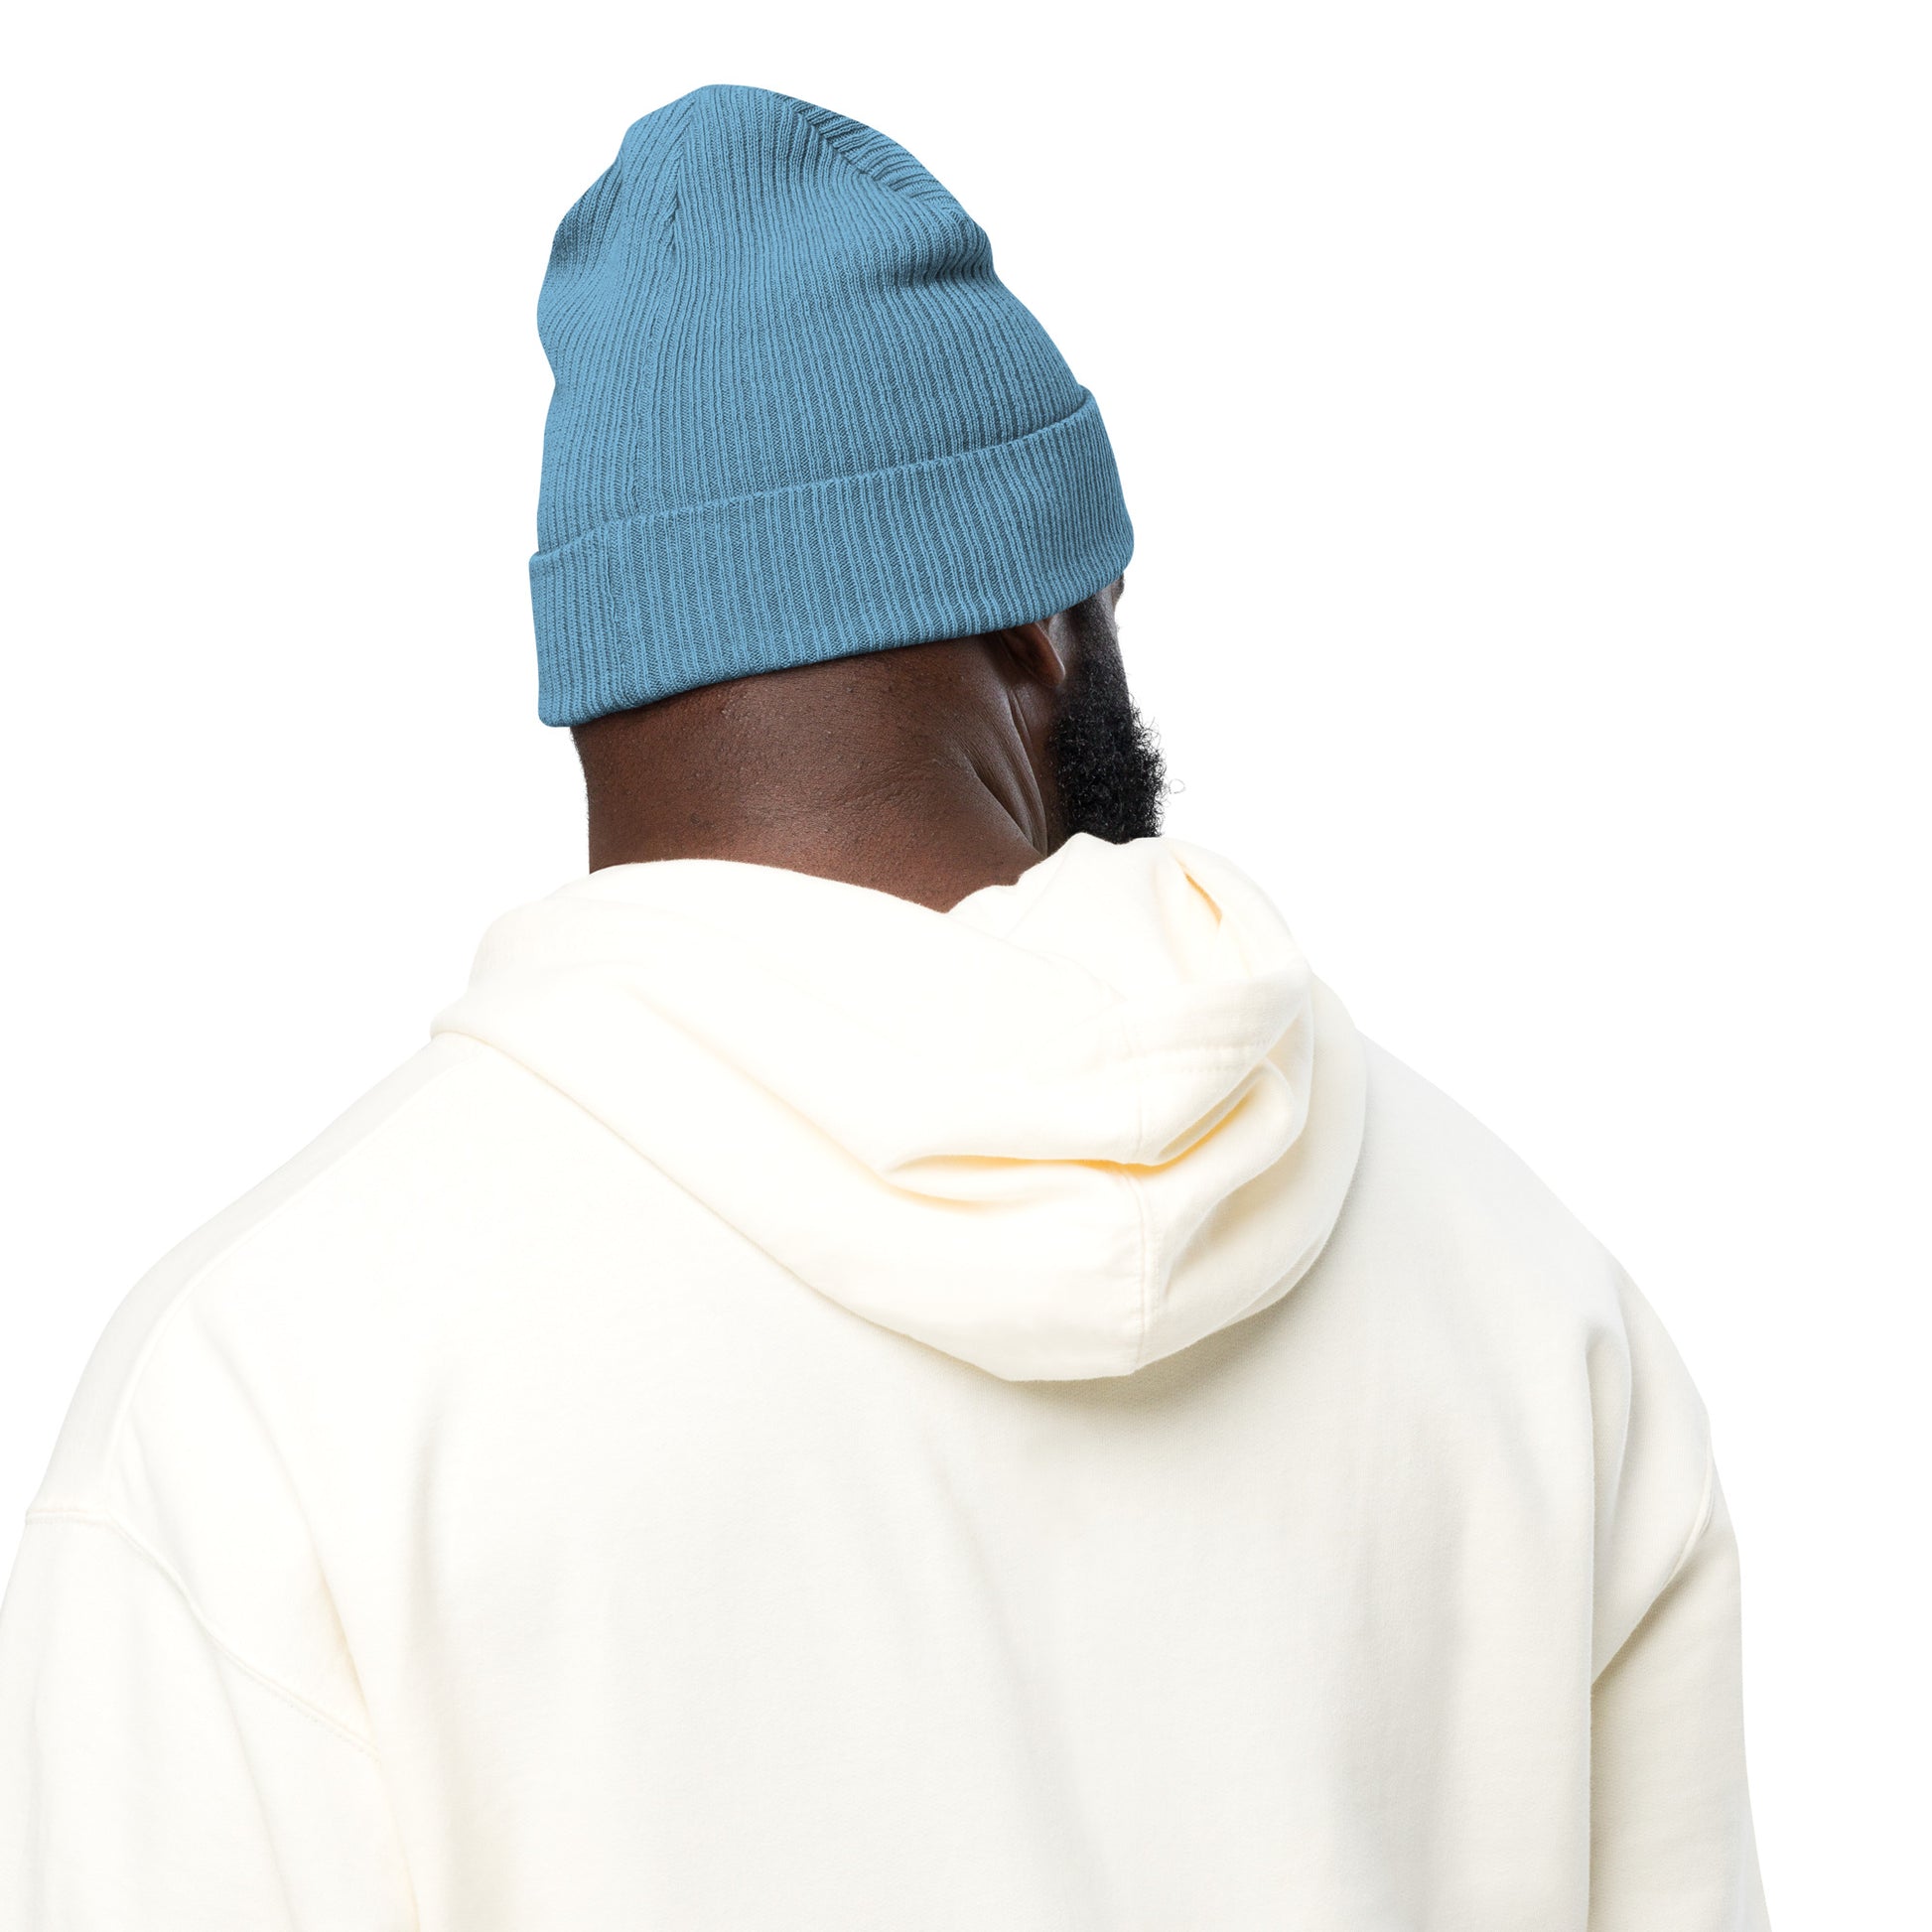 SimpleCycle Organic Ribbed Beanie blue back view